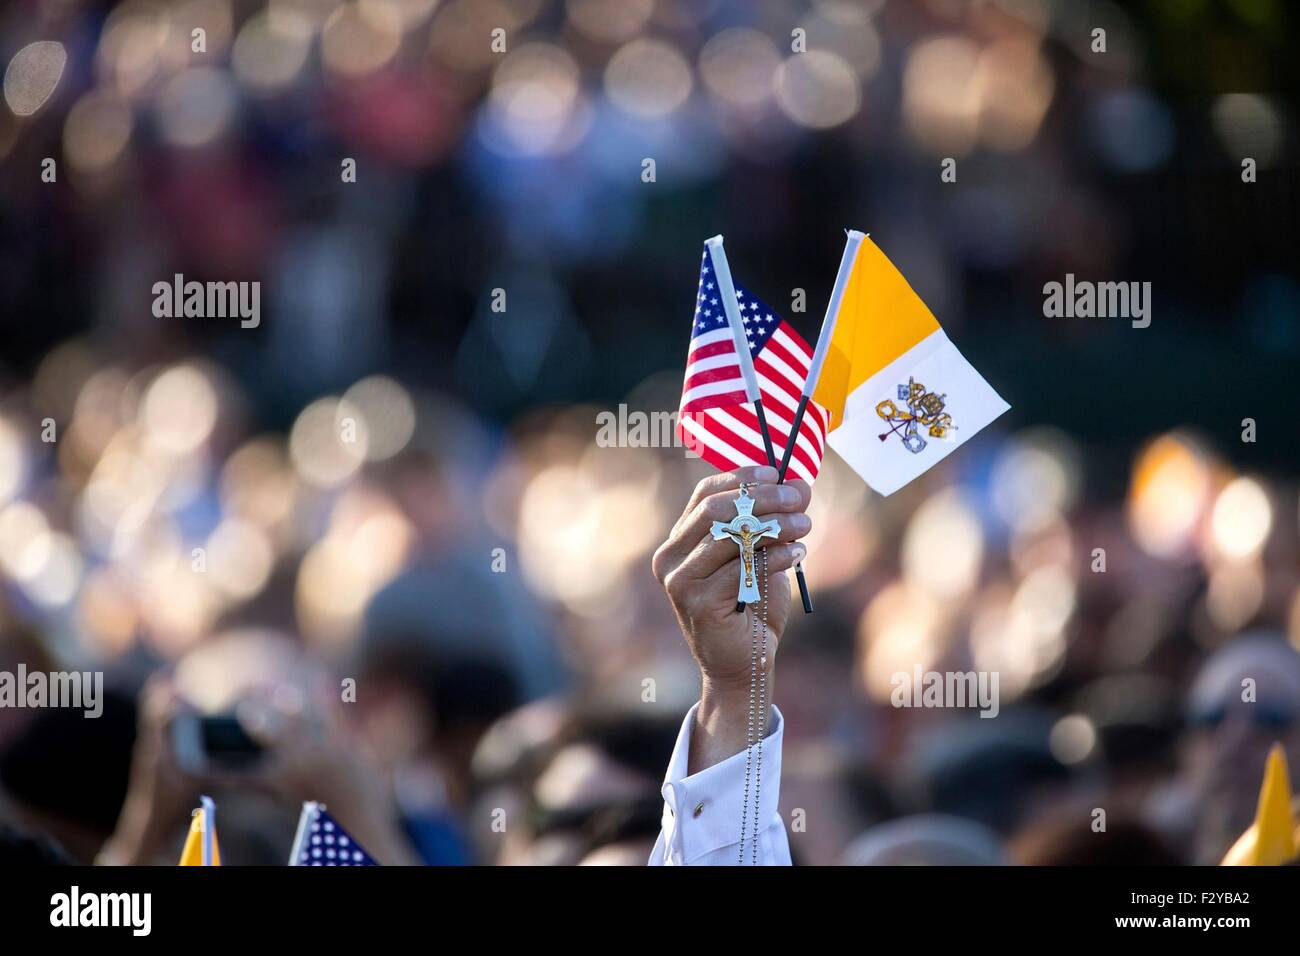 A guest for Pope Francis arrival ceremony on the South Lawn of the White House holds up the American flag, the Vatican City flag, and a cross September 23, 2015 in Washington, DC. This is the first visit by Pope Francis to the United States. Stock Photo